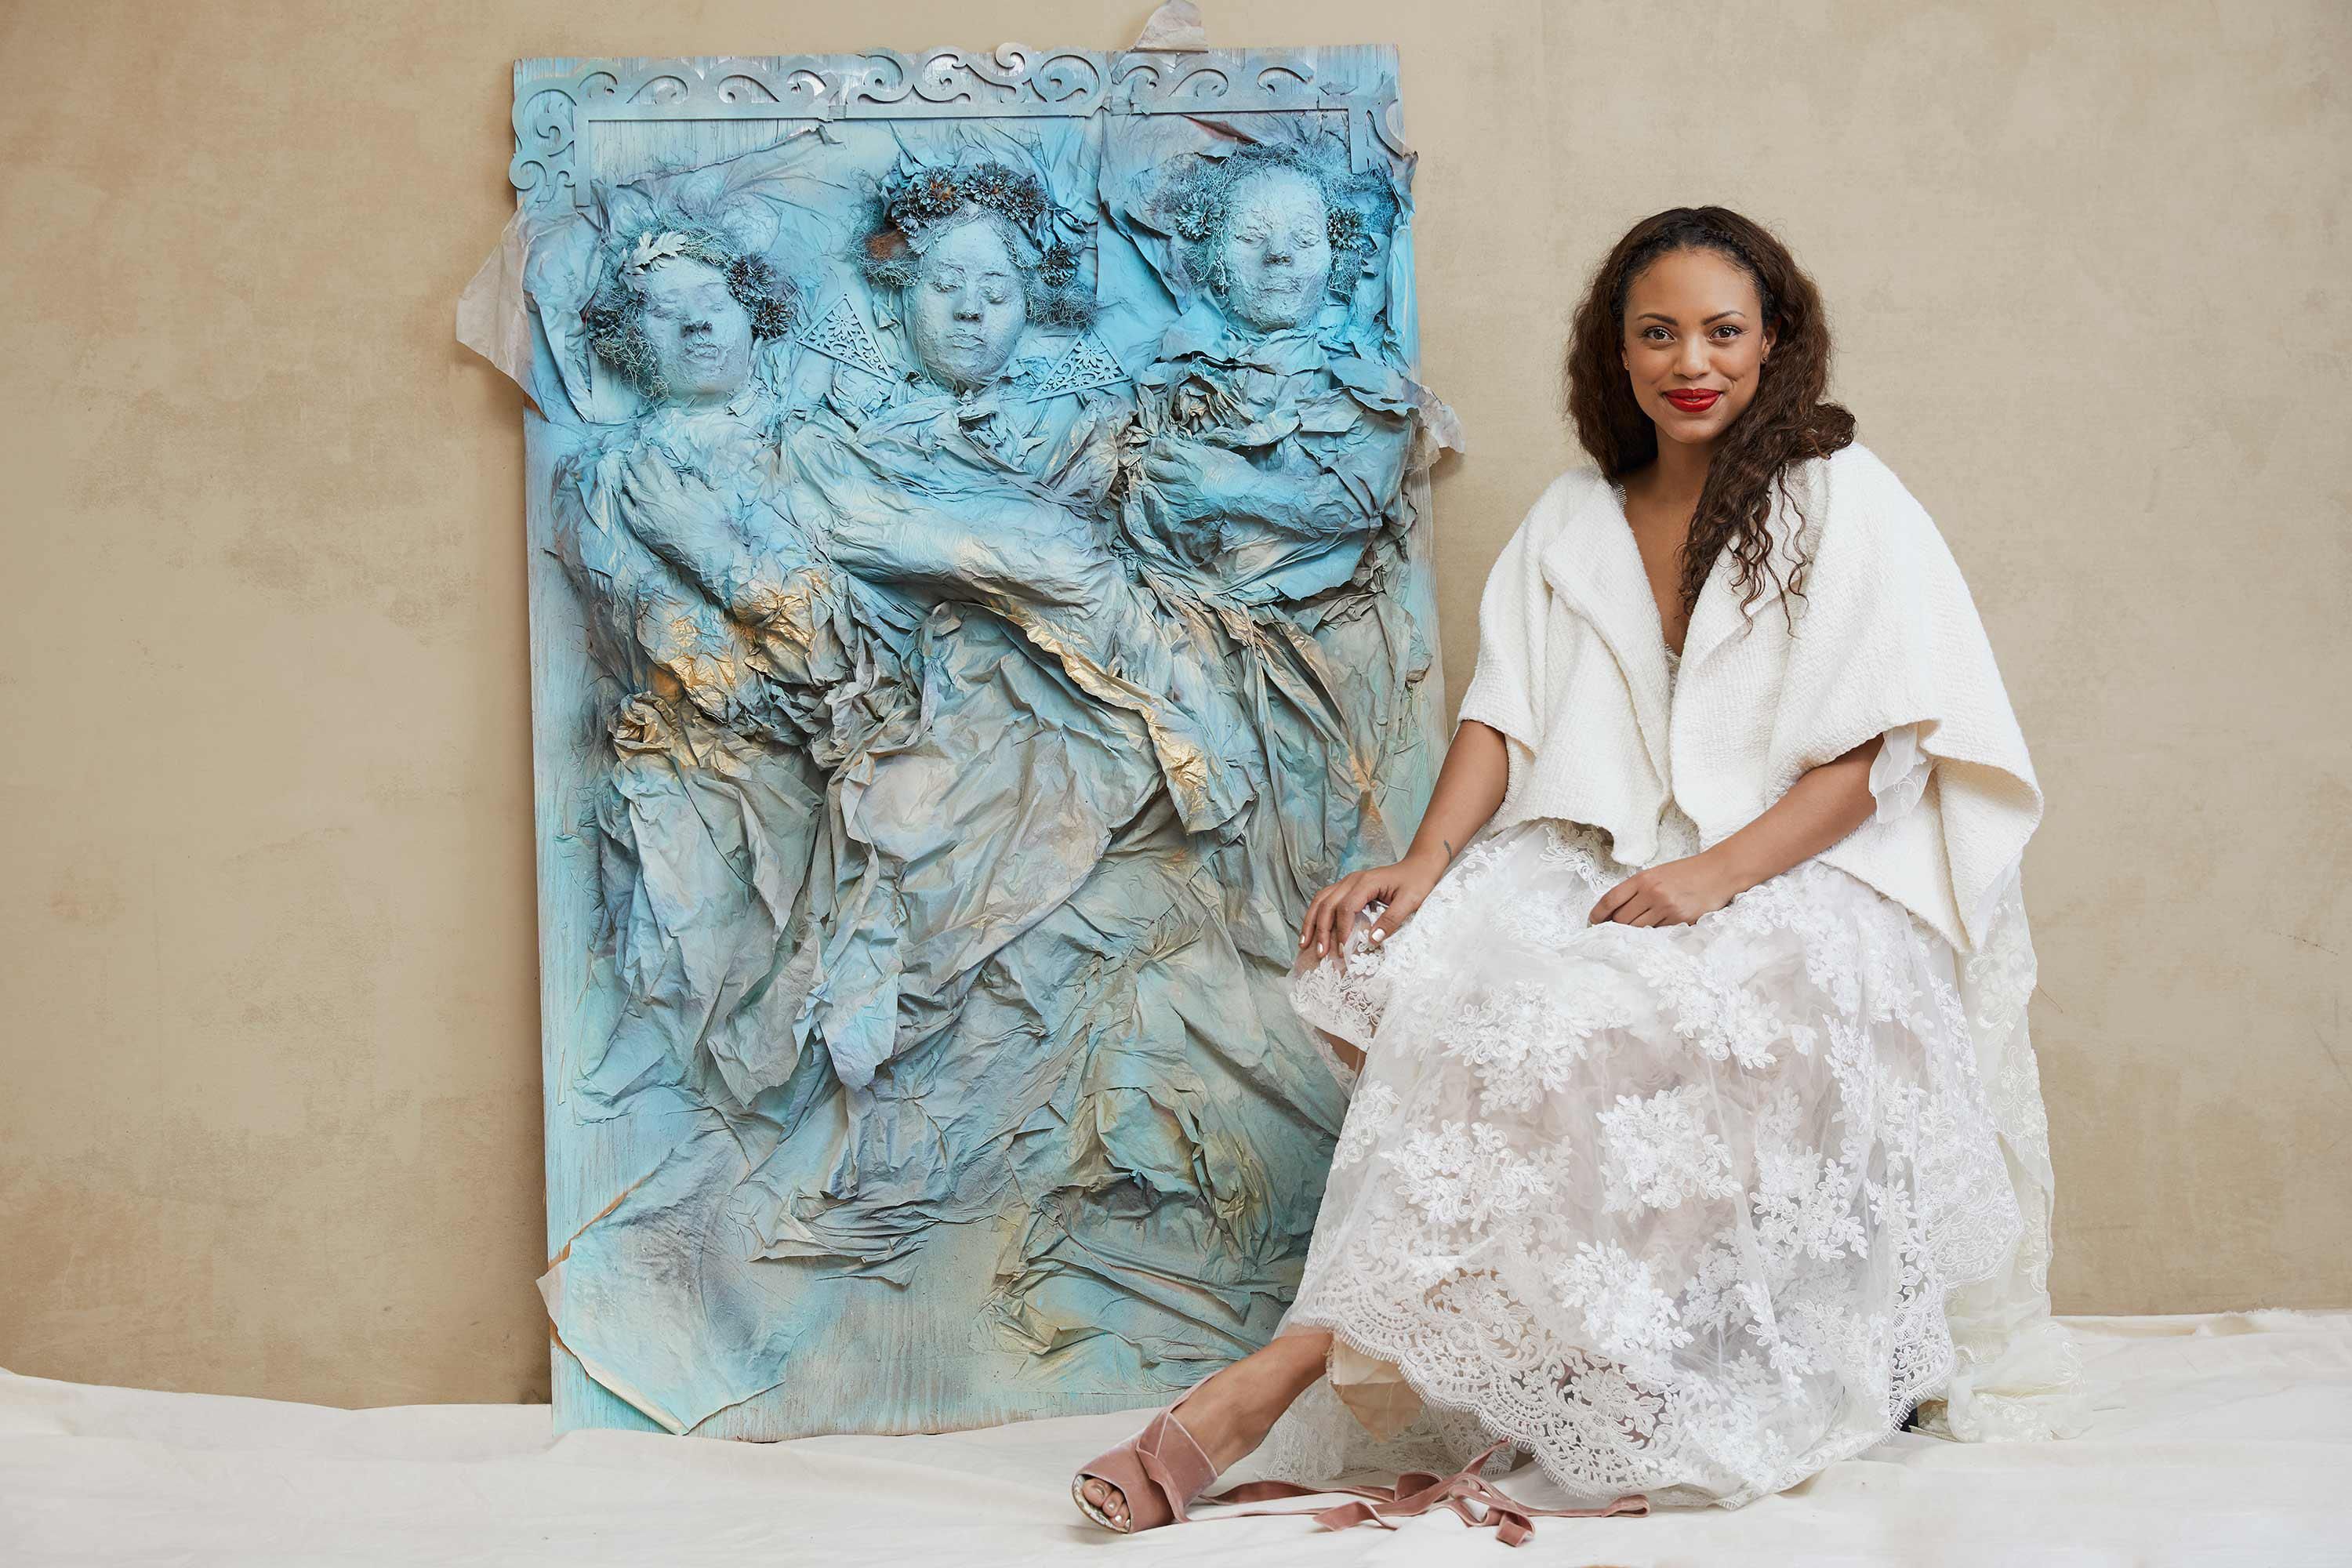 The artist Jaime Lee Kirchner of the show Bull sits next to her three dimensional painting The Three Belles.